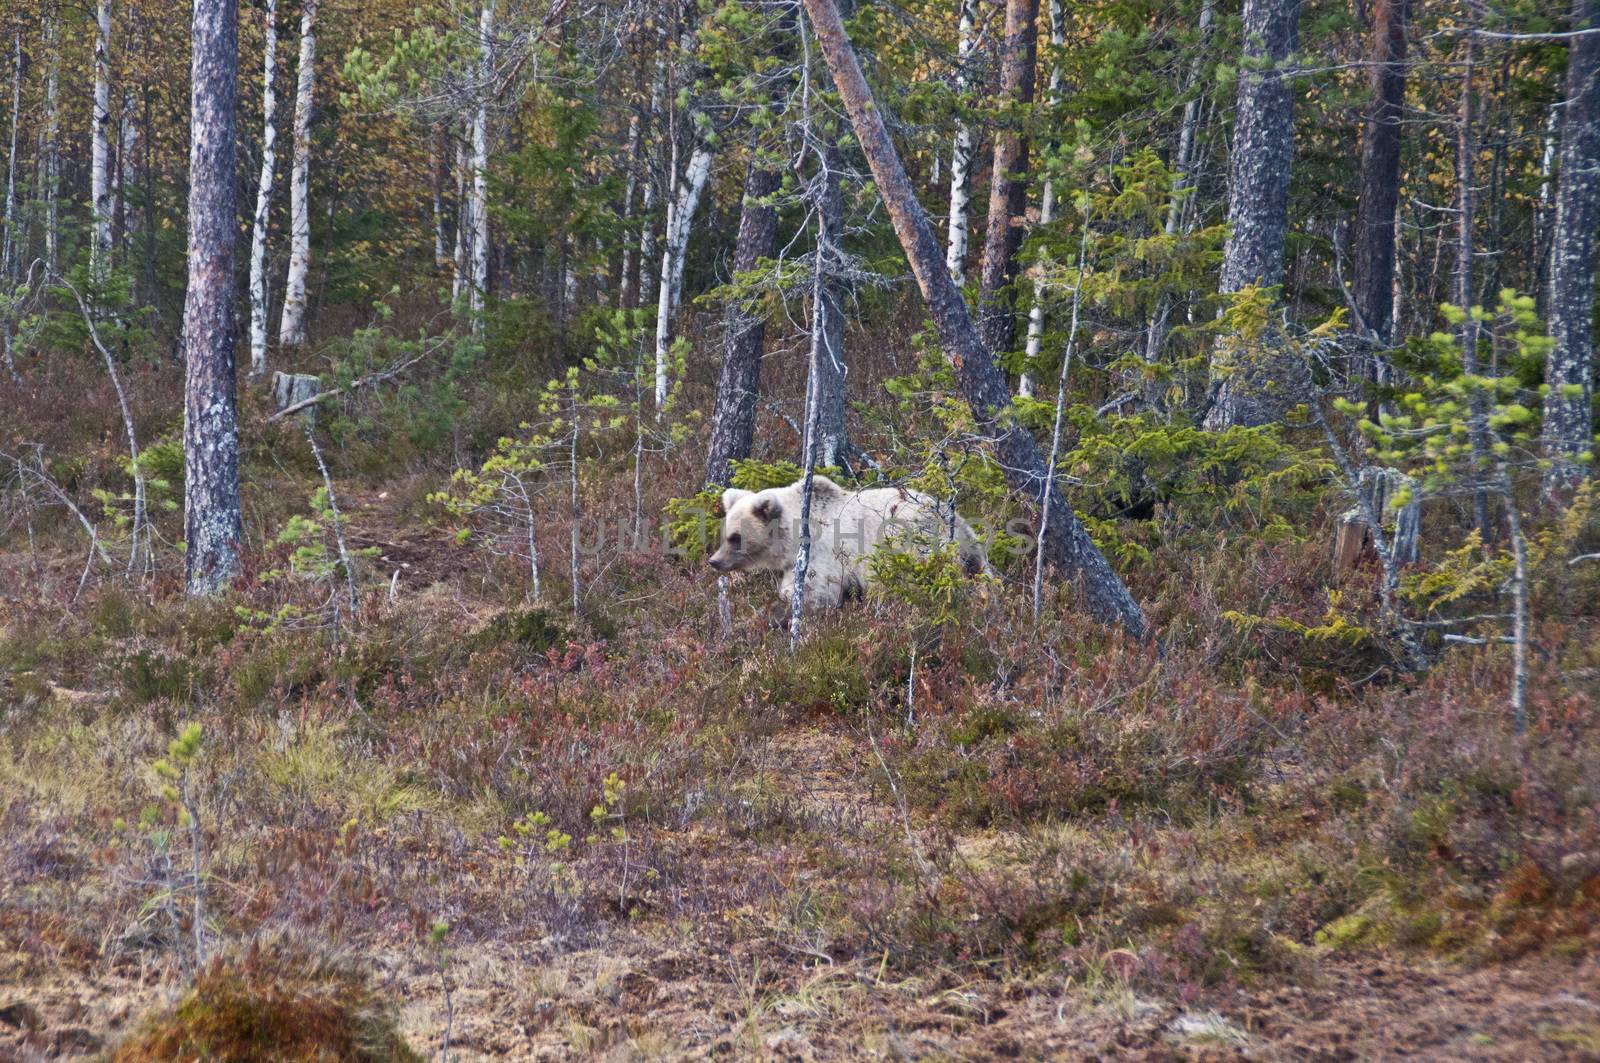 A brown bear in the region of Kainuu, Finland